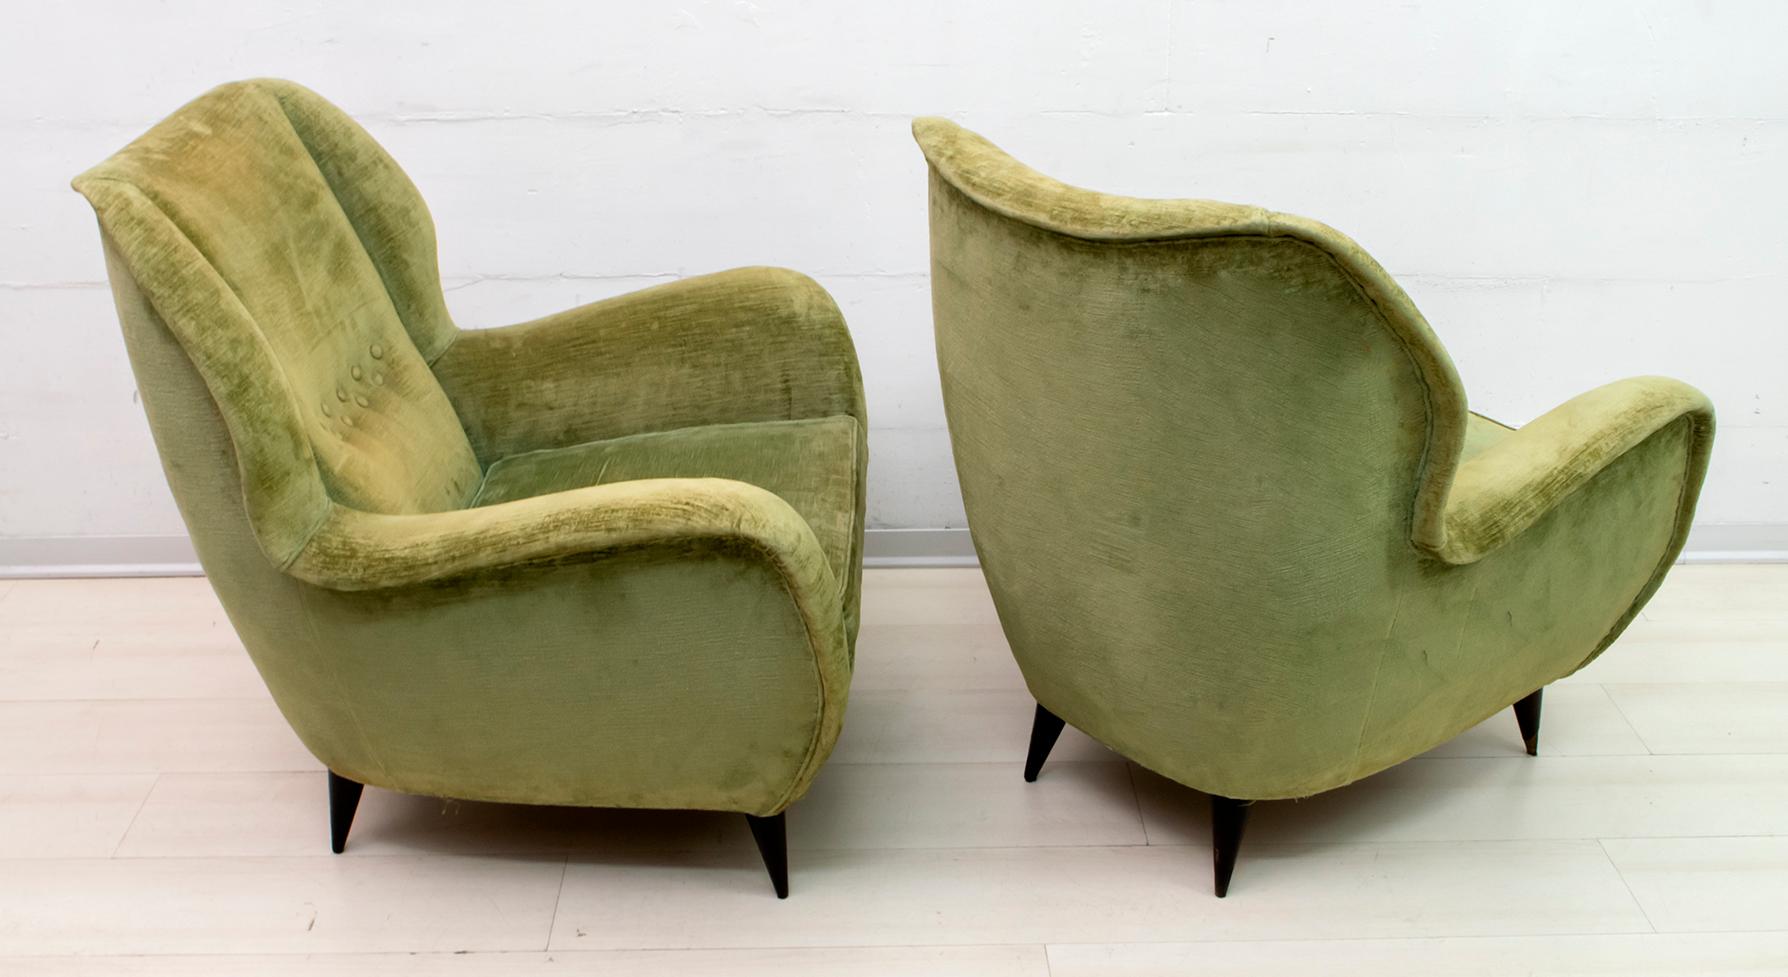 Elegant and splendid pair of Mid-Century Modern armchairs with high back by Gio Ponti, 1950 for Edizioni ISA, Bergamo. Carved profile, refined lines, sensual and deep comfort. The chairs have their original linen velvet covers.

  